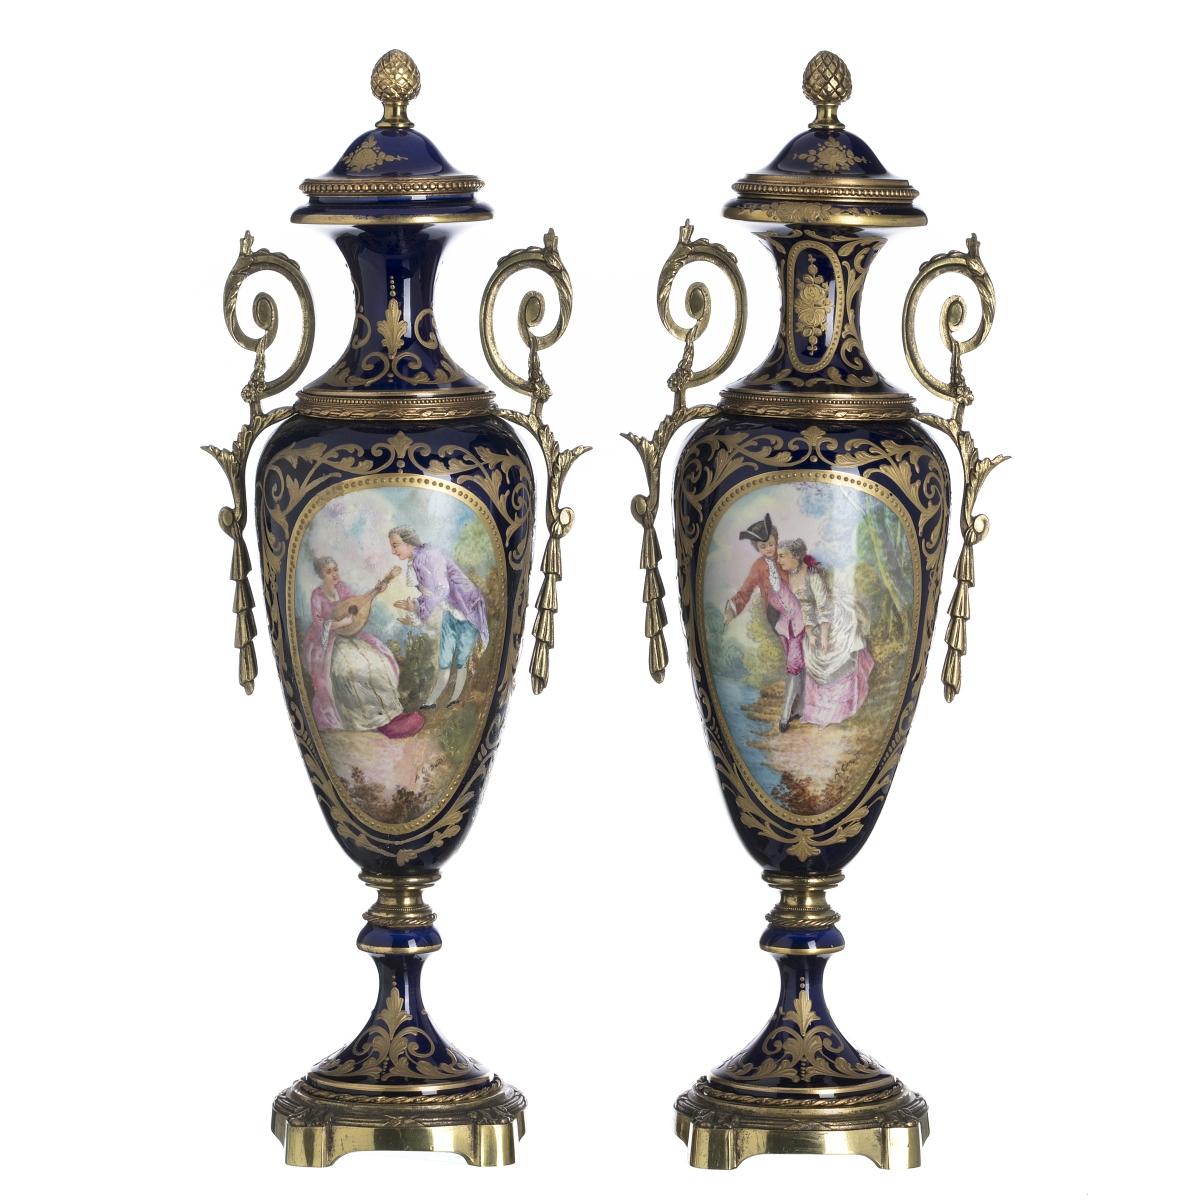 Pair of vases
with cover
In French Porcelain, Sévres, polychrome decoration with figures in the garden, maple in shades of blue and gold.
Signed Height: 49 cm.